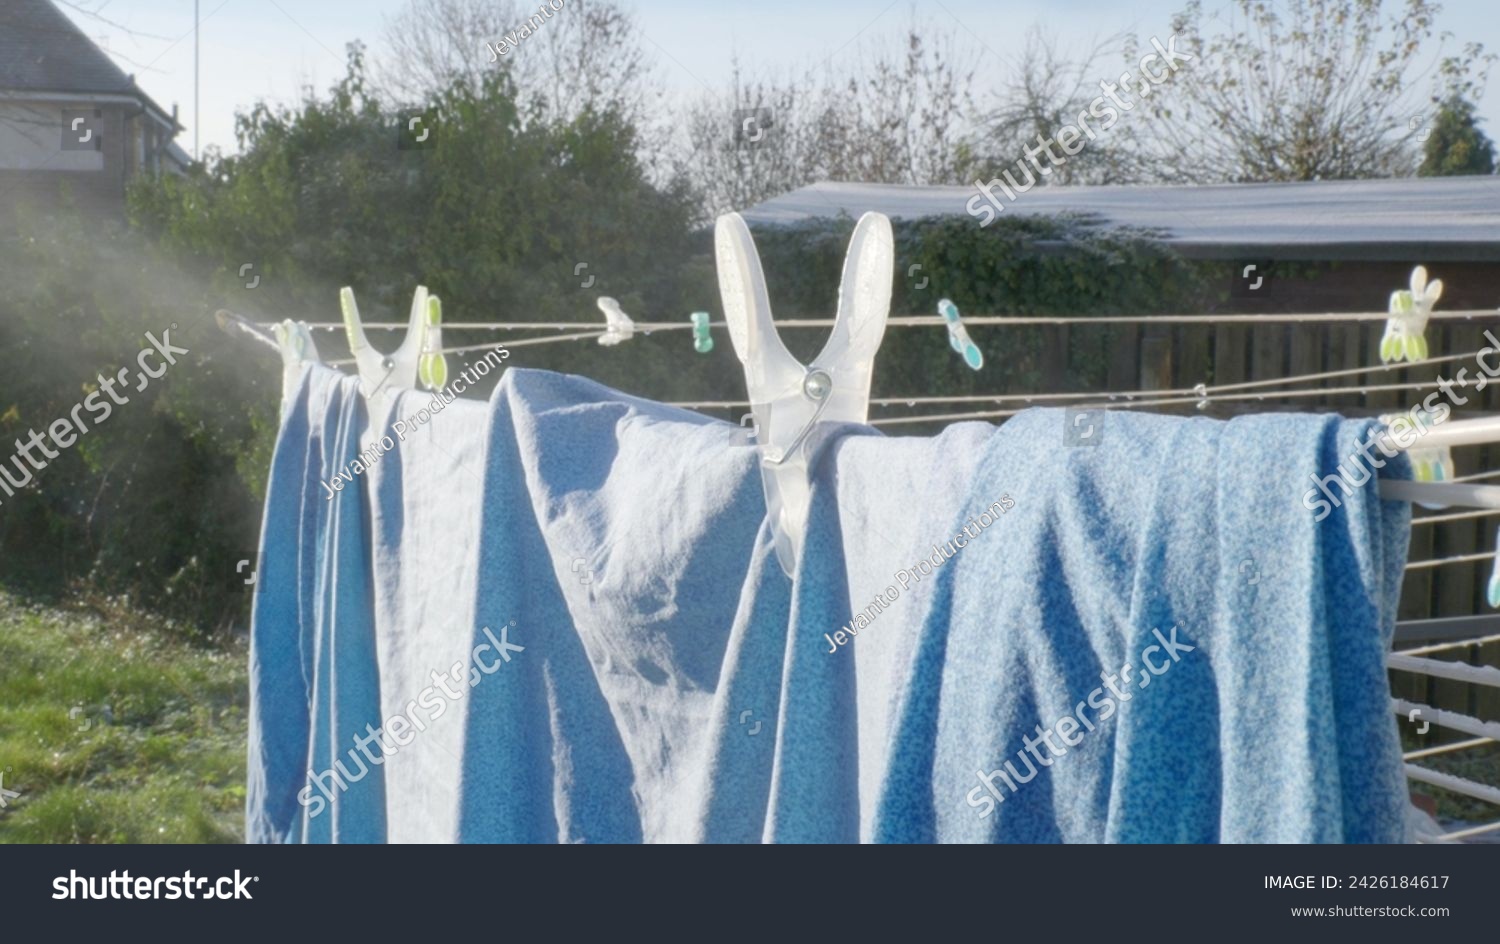 Evaporation of water of clothes drying in the backyard. #2426184617